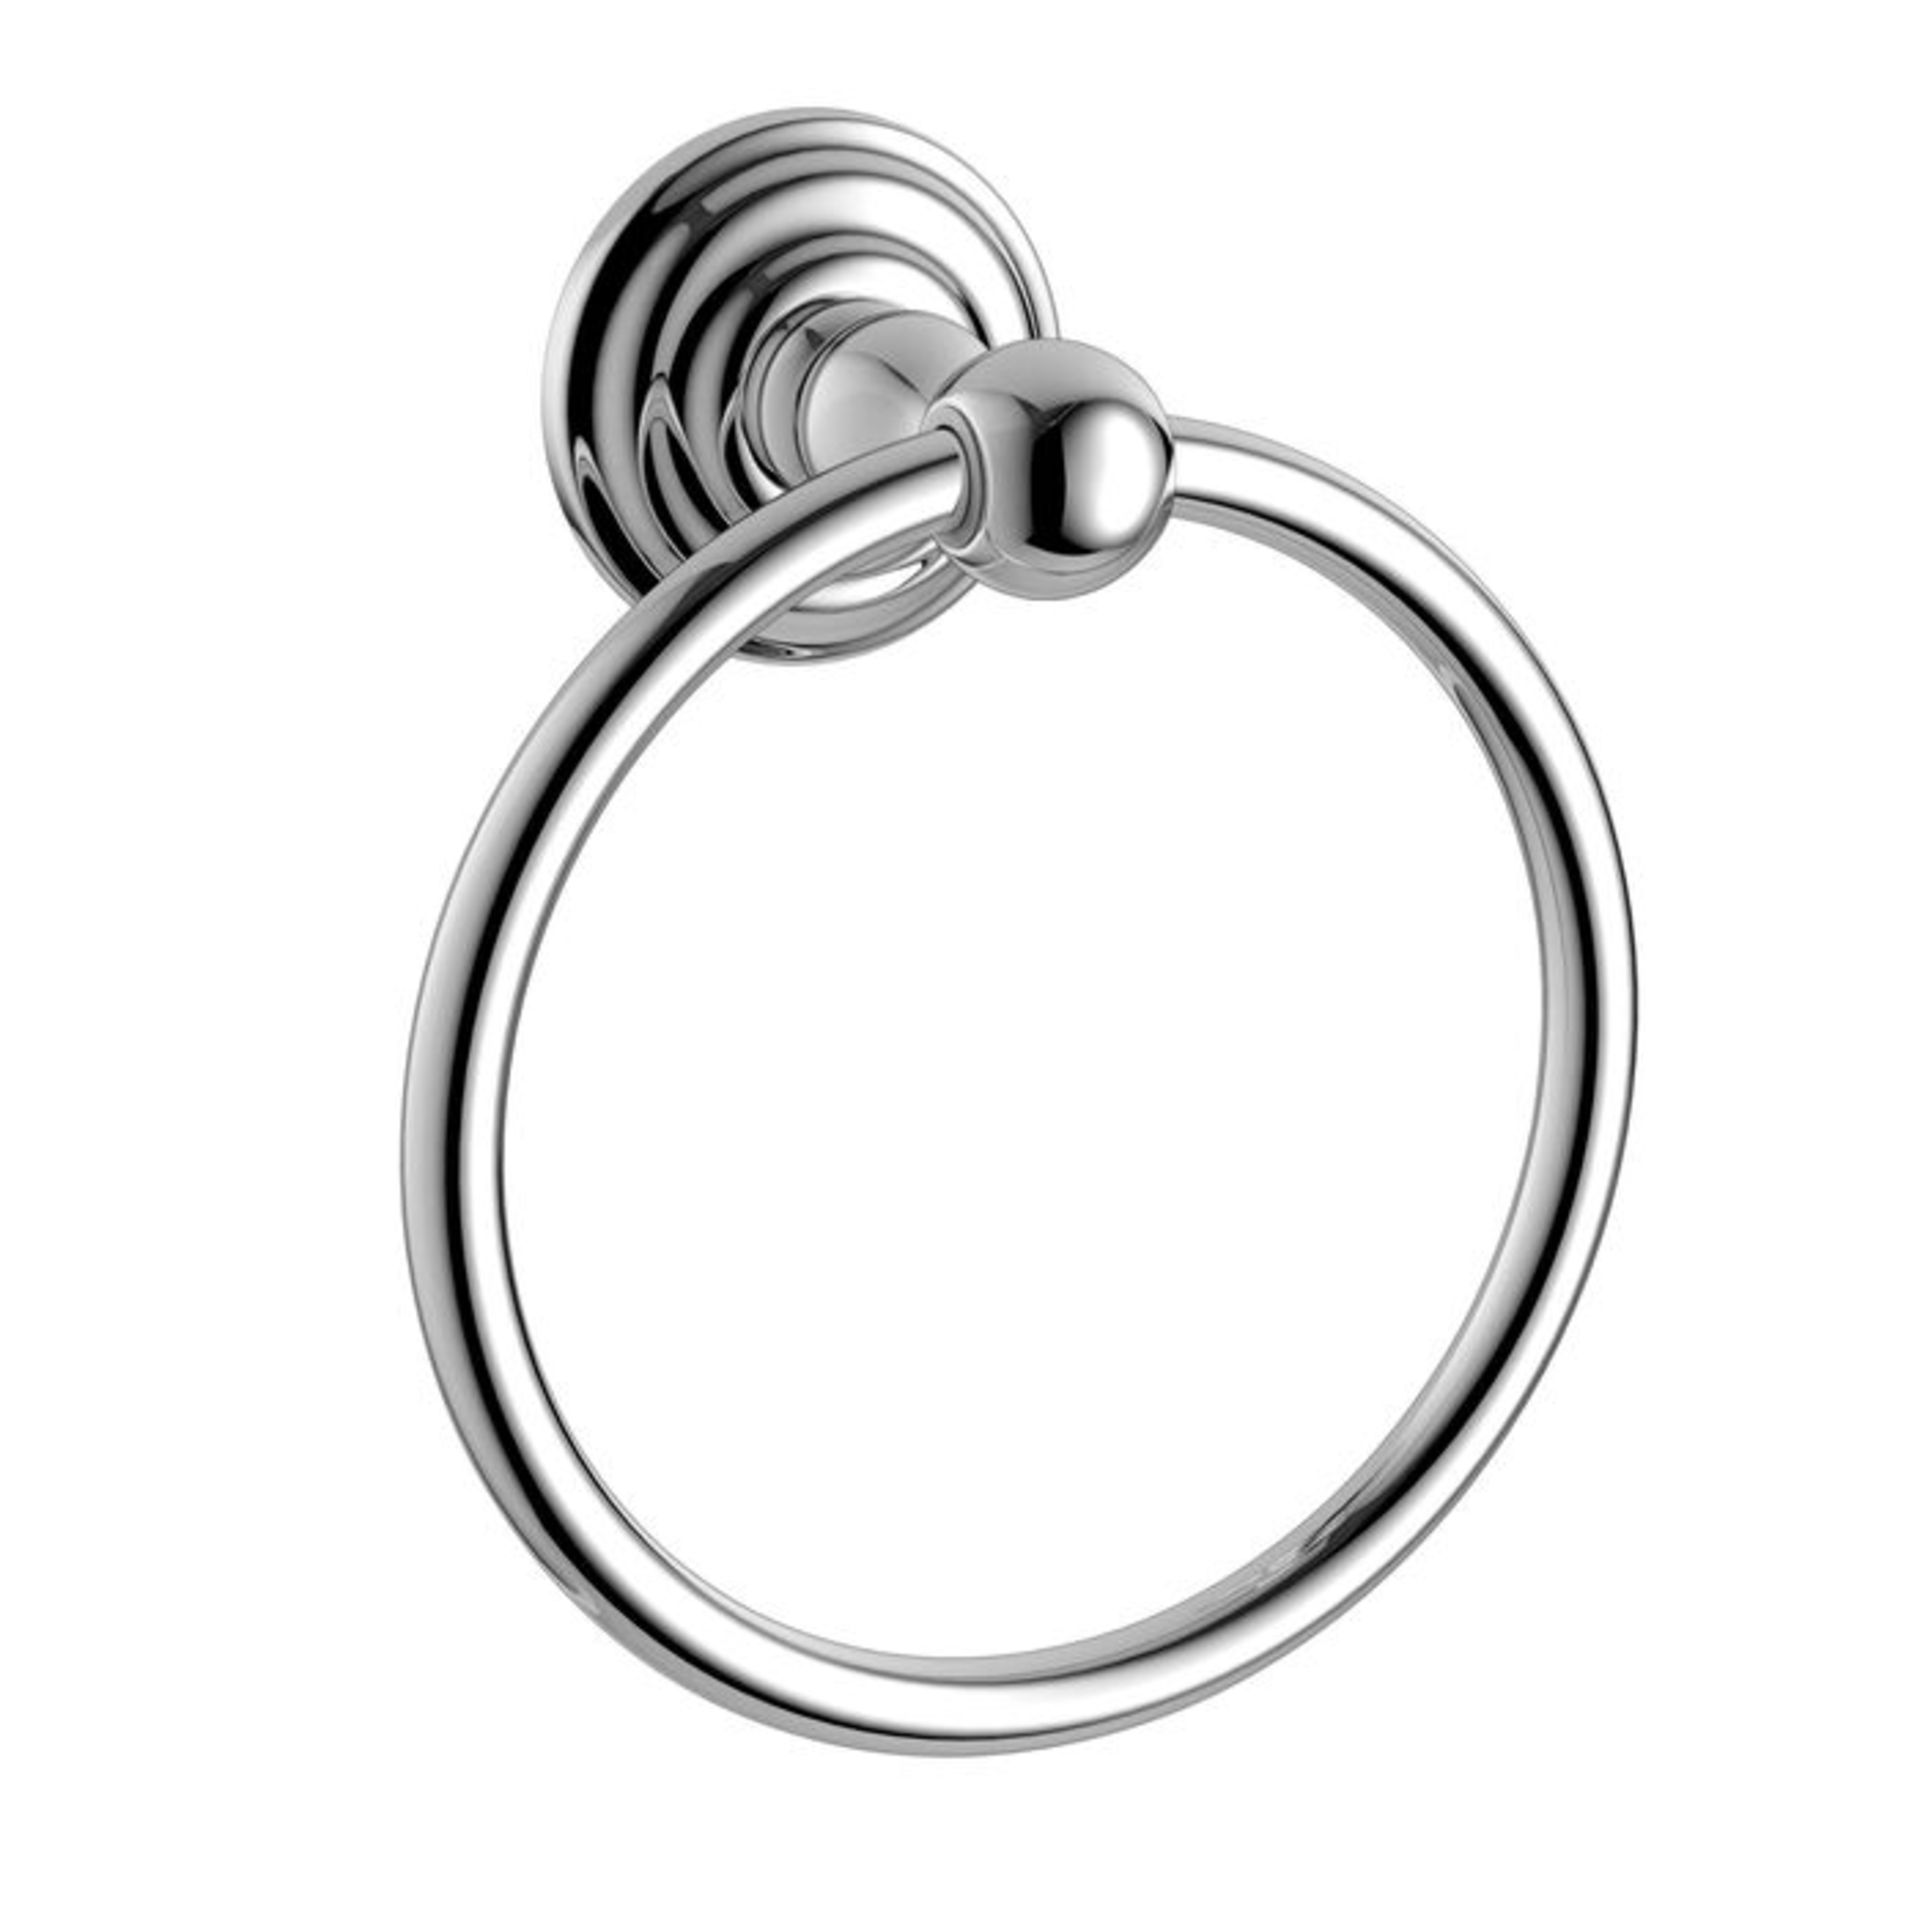 (EE1019) York Towel Ring Finishes your bathroom with a little extra functionality and style M... - Image 3 of 3